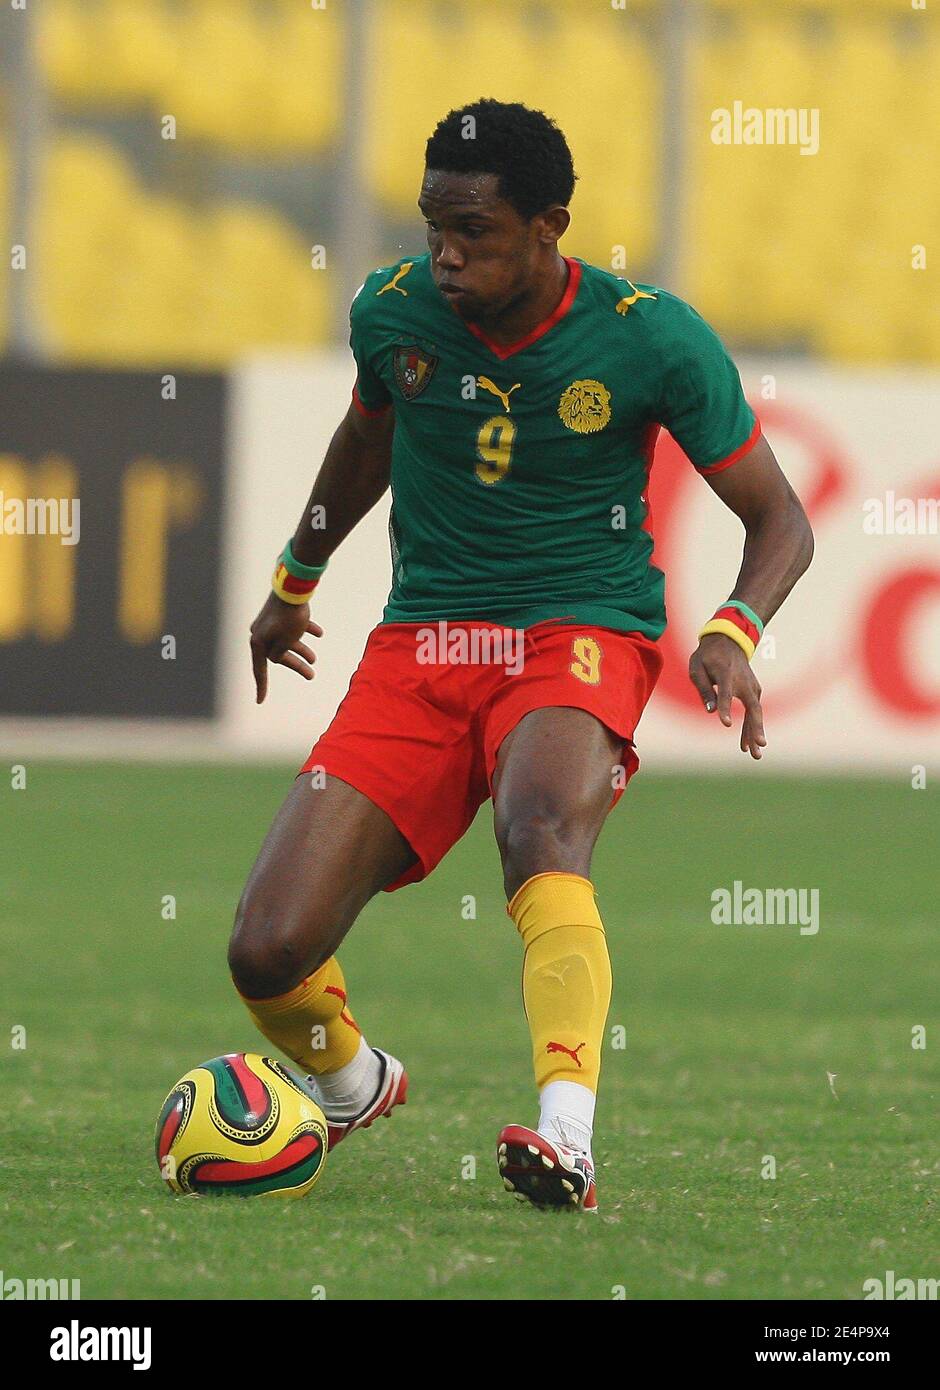 Cameroon's Samuel Eto'o during the African Cup of Nations soccer match, Cameroon vs Zambia in Kumasi, Ghana on January 26, 2008. Cameroon won the match 5-1. Photo by Steeve McMay/Cameleon/ABACAPRESS.COM Stock Photo